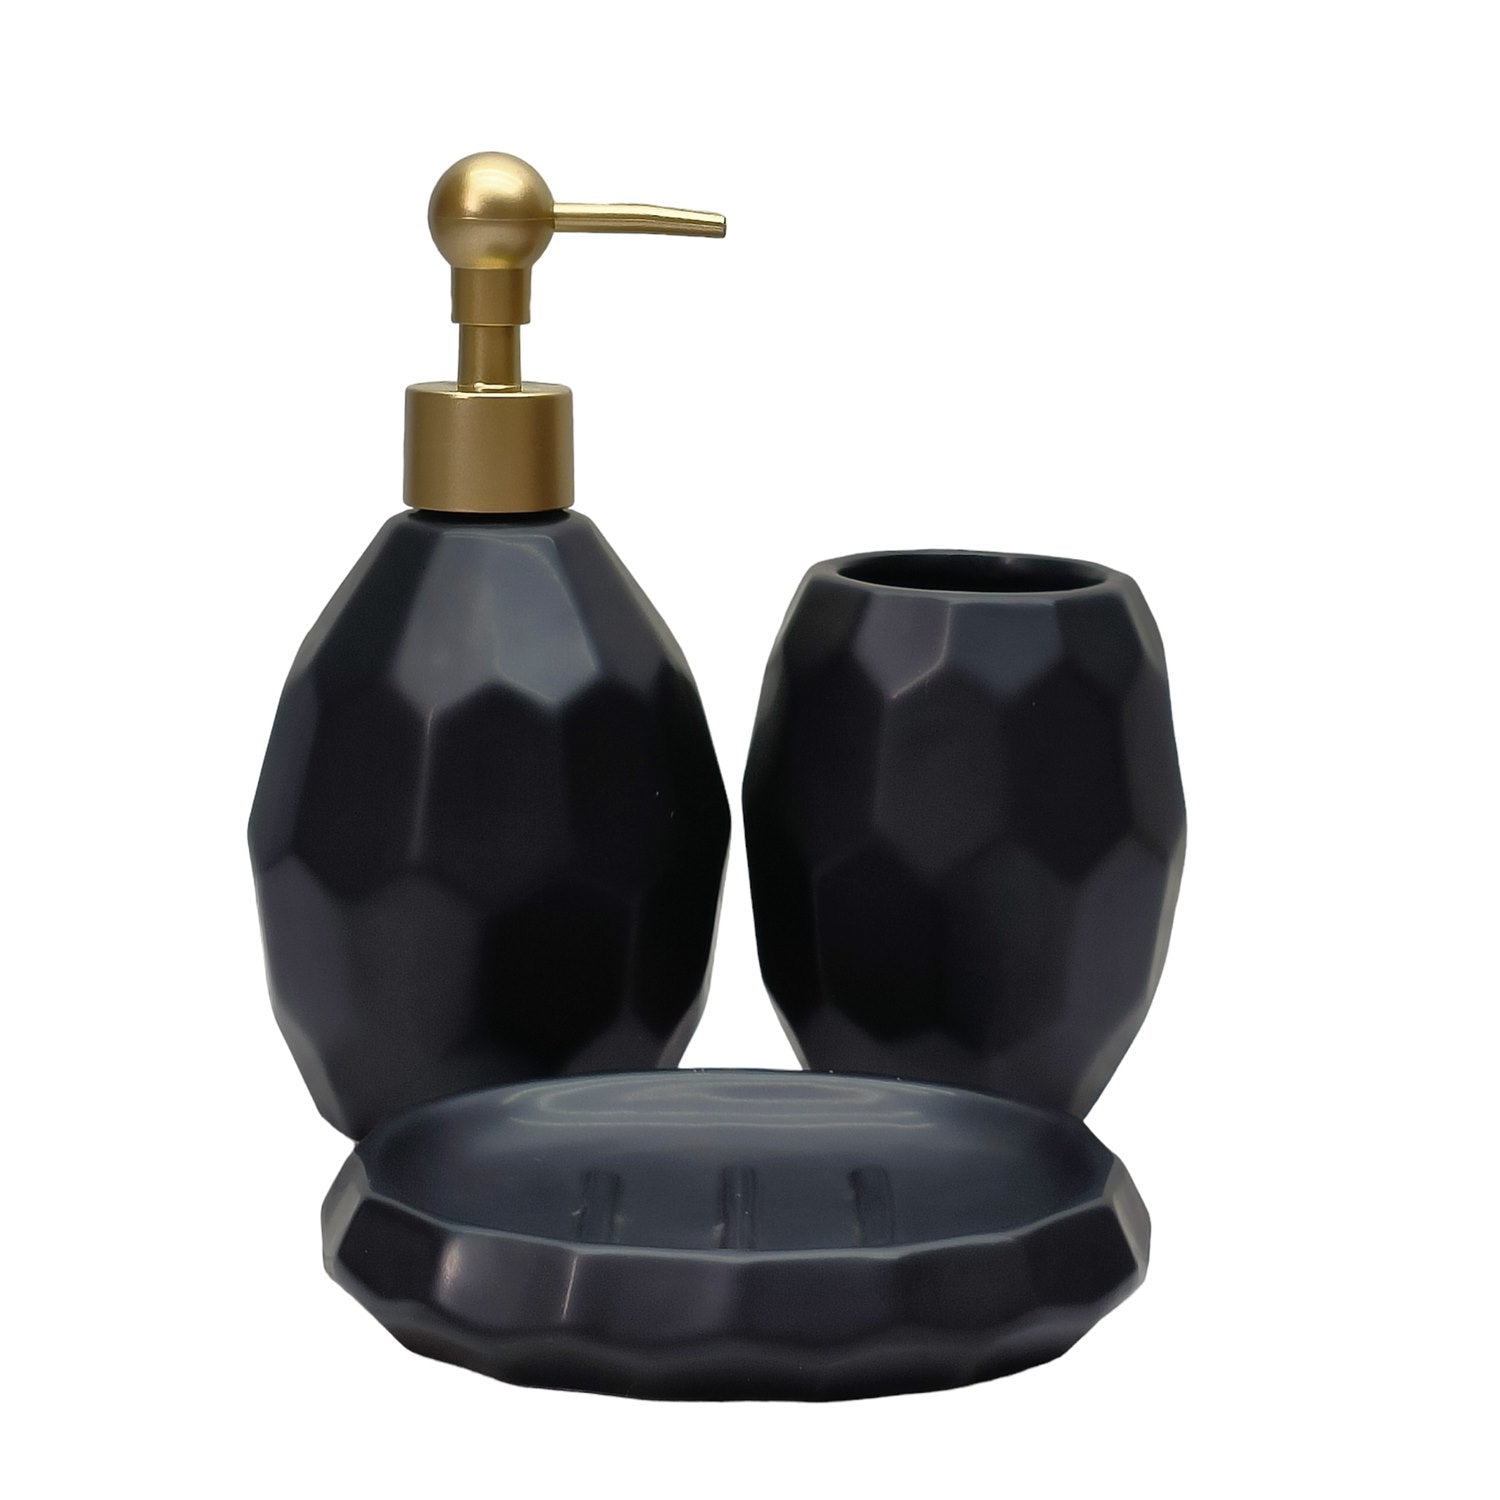 Ceramic Soap Dispenser Set with Toothbrush Holder and Soap Dish, Set of 3 Bathroom Accessories for Home (C3014)